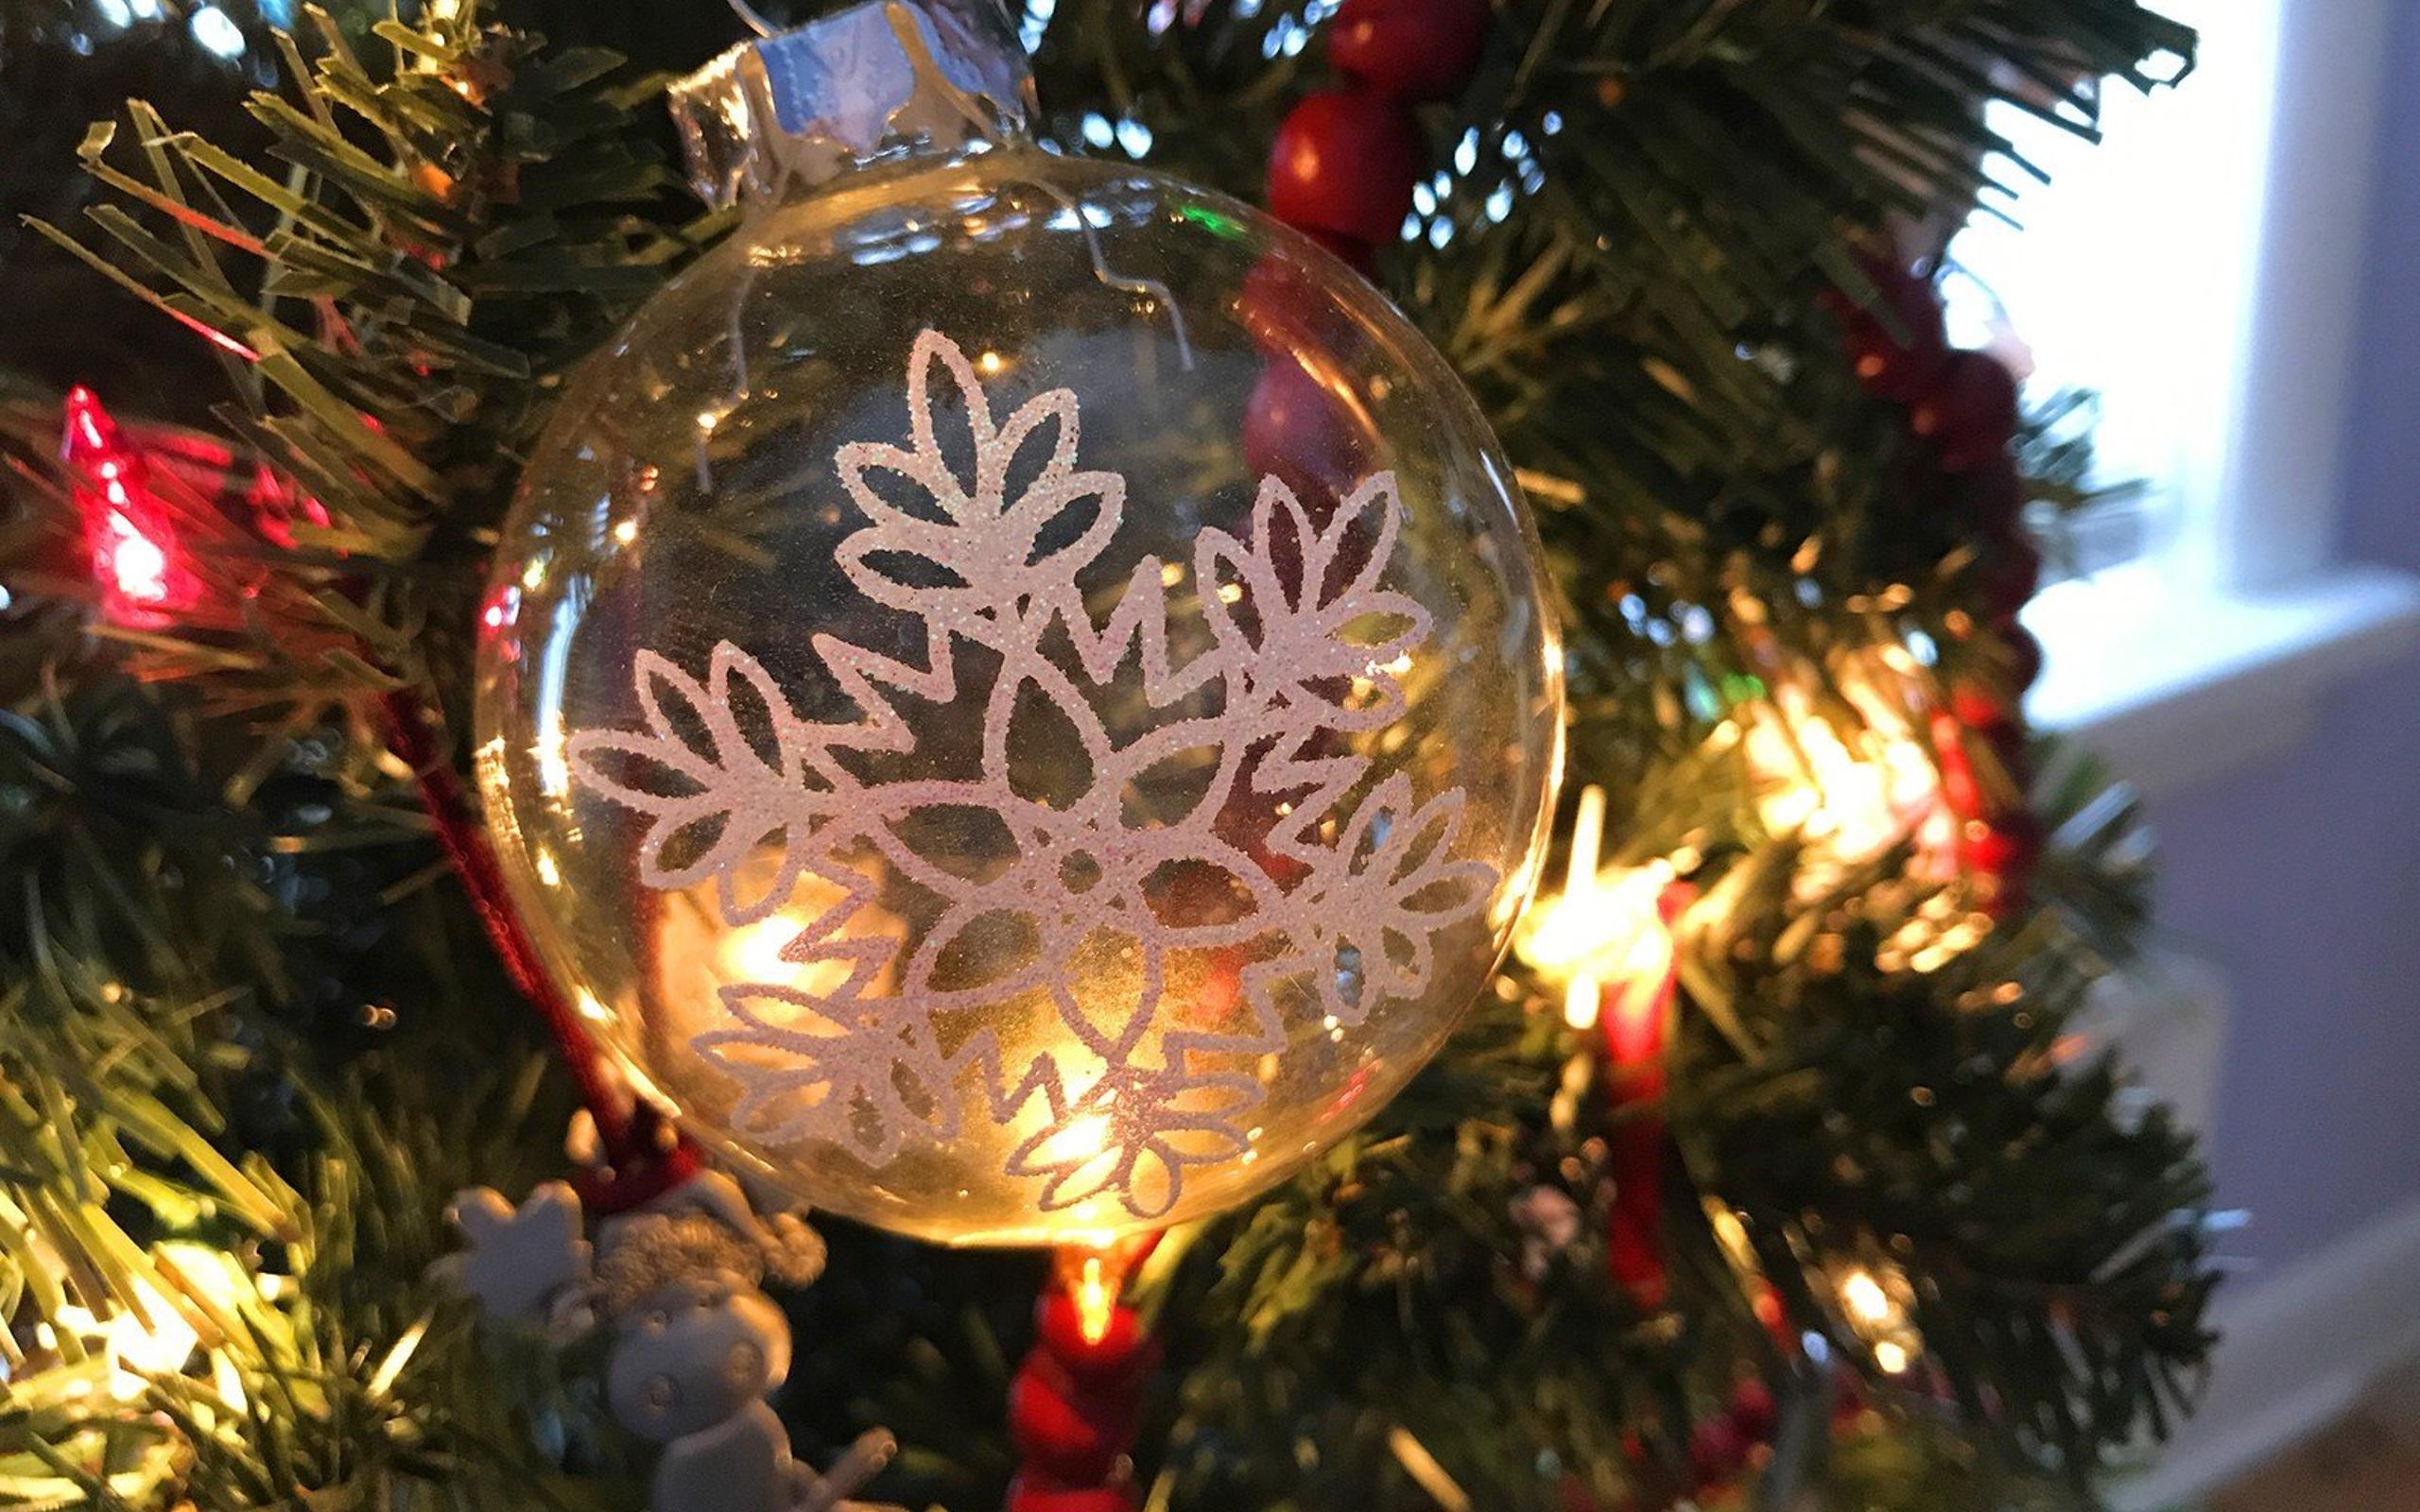 A glass ornament hanging on the tree - Christmas lights